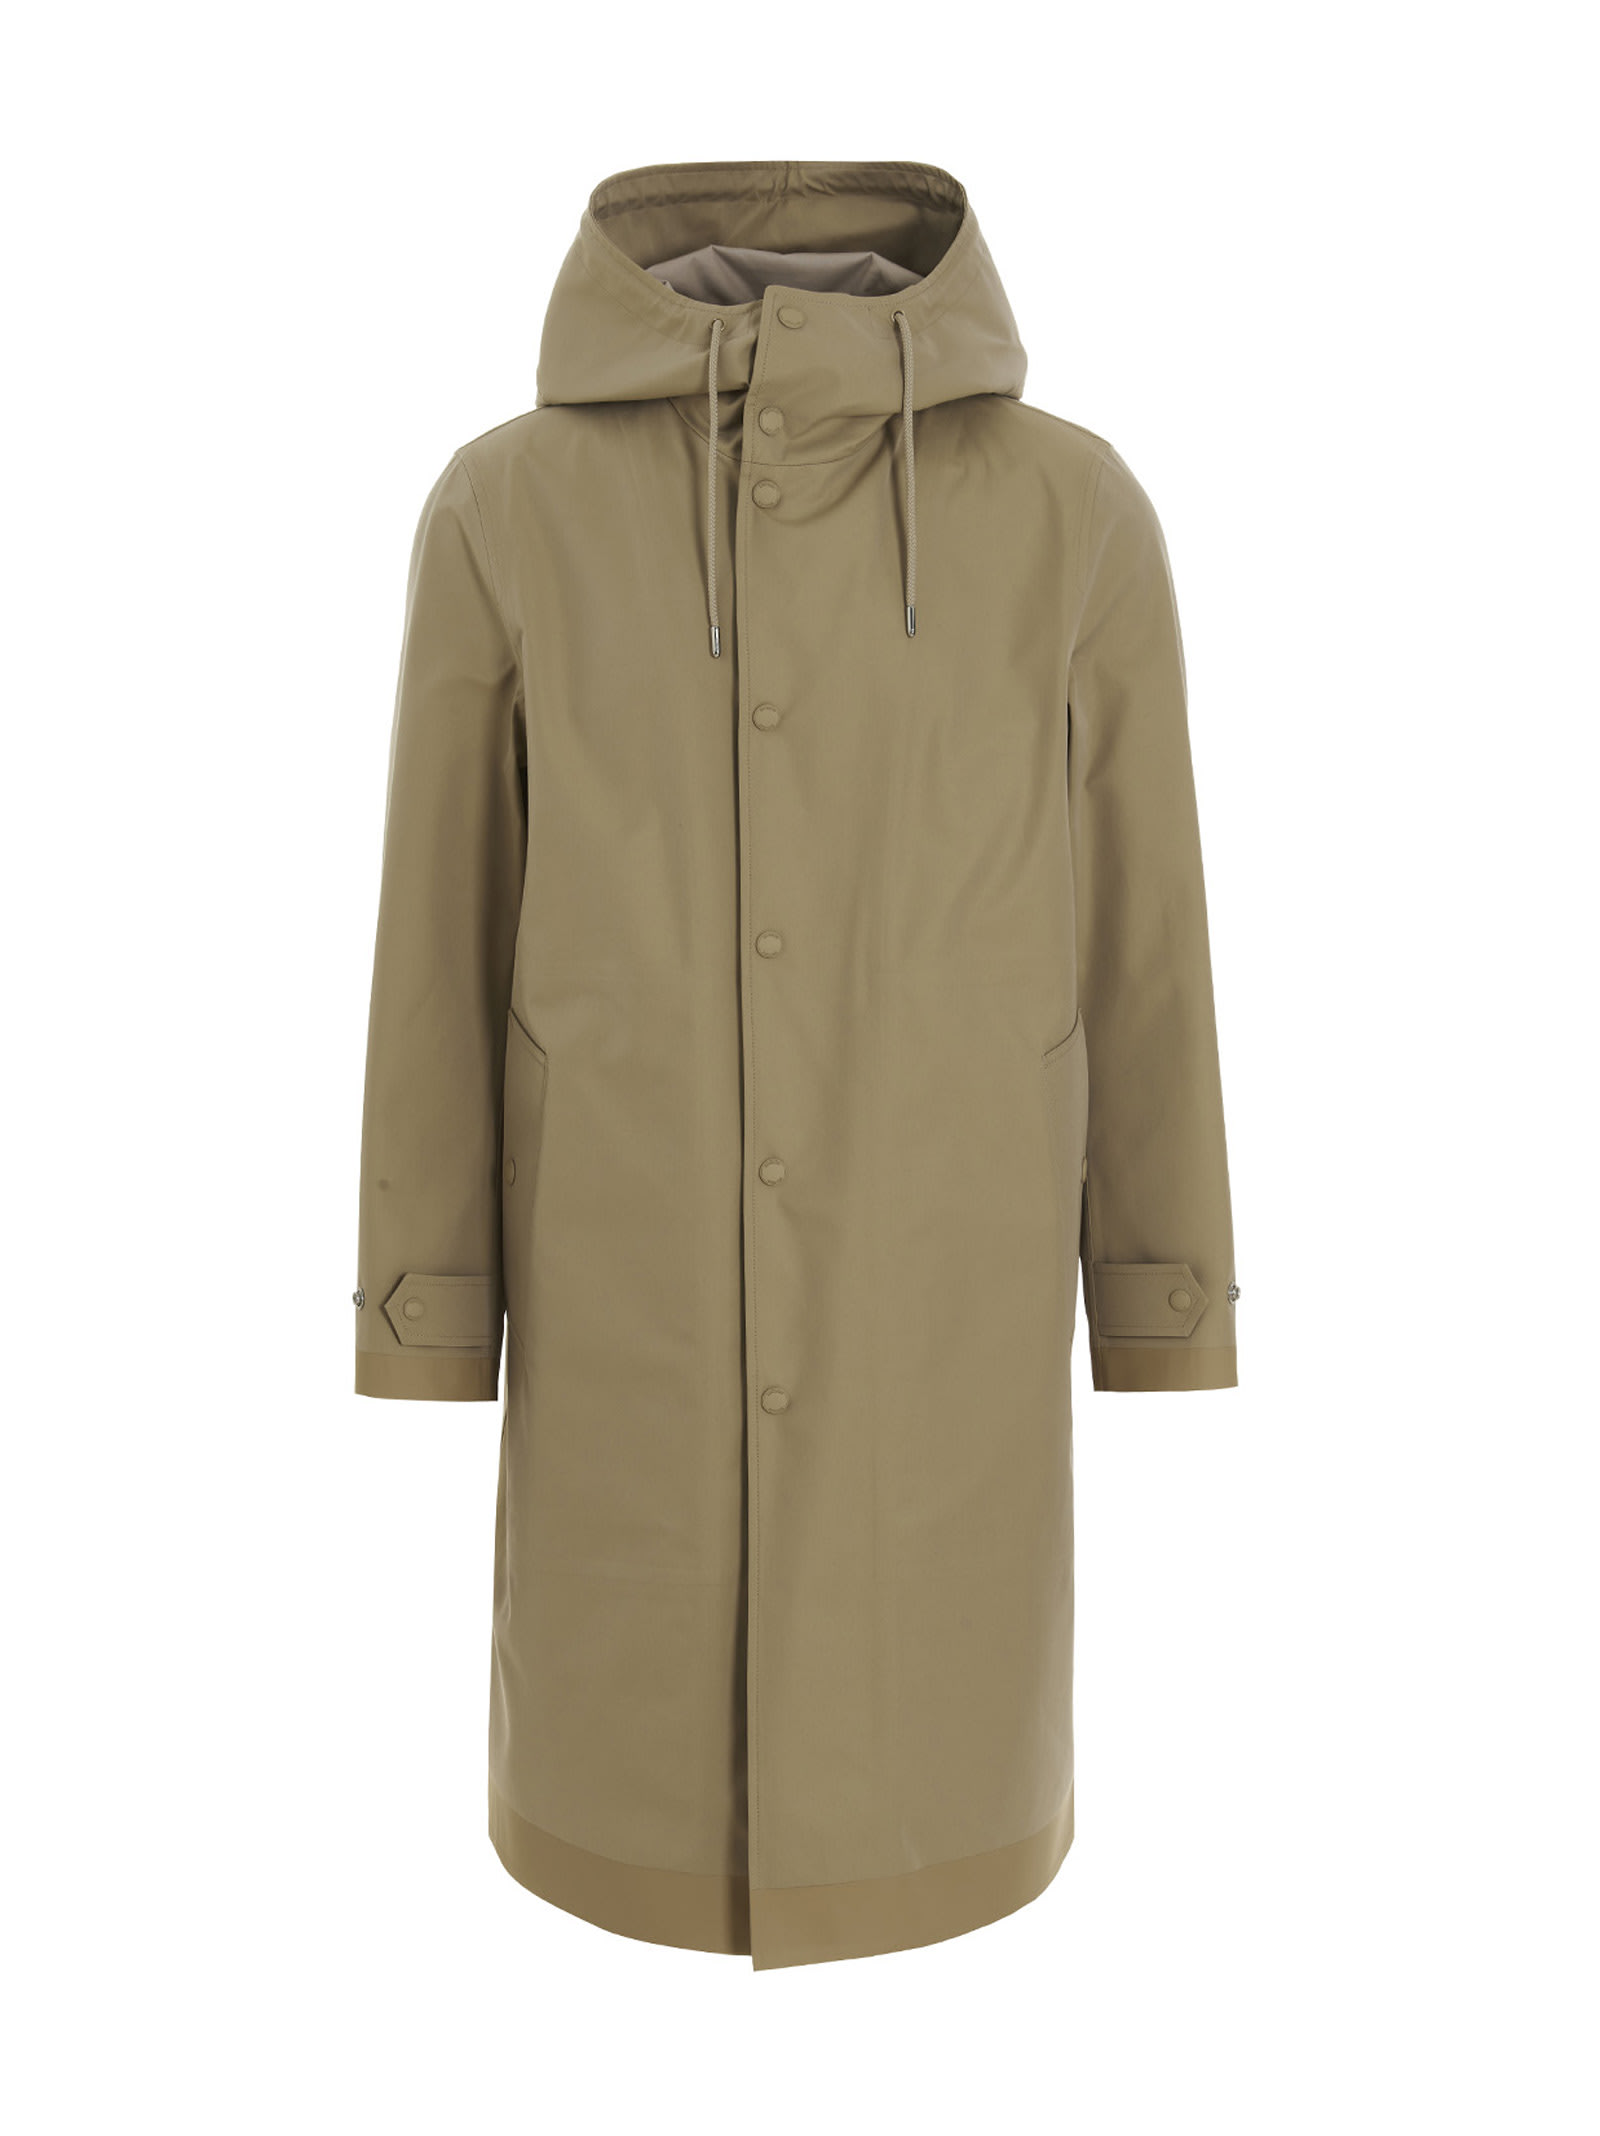 Burberry lavers Hooded Jacket